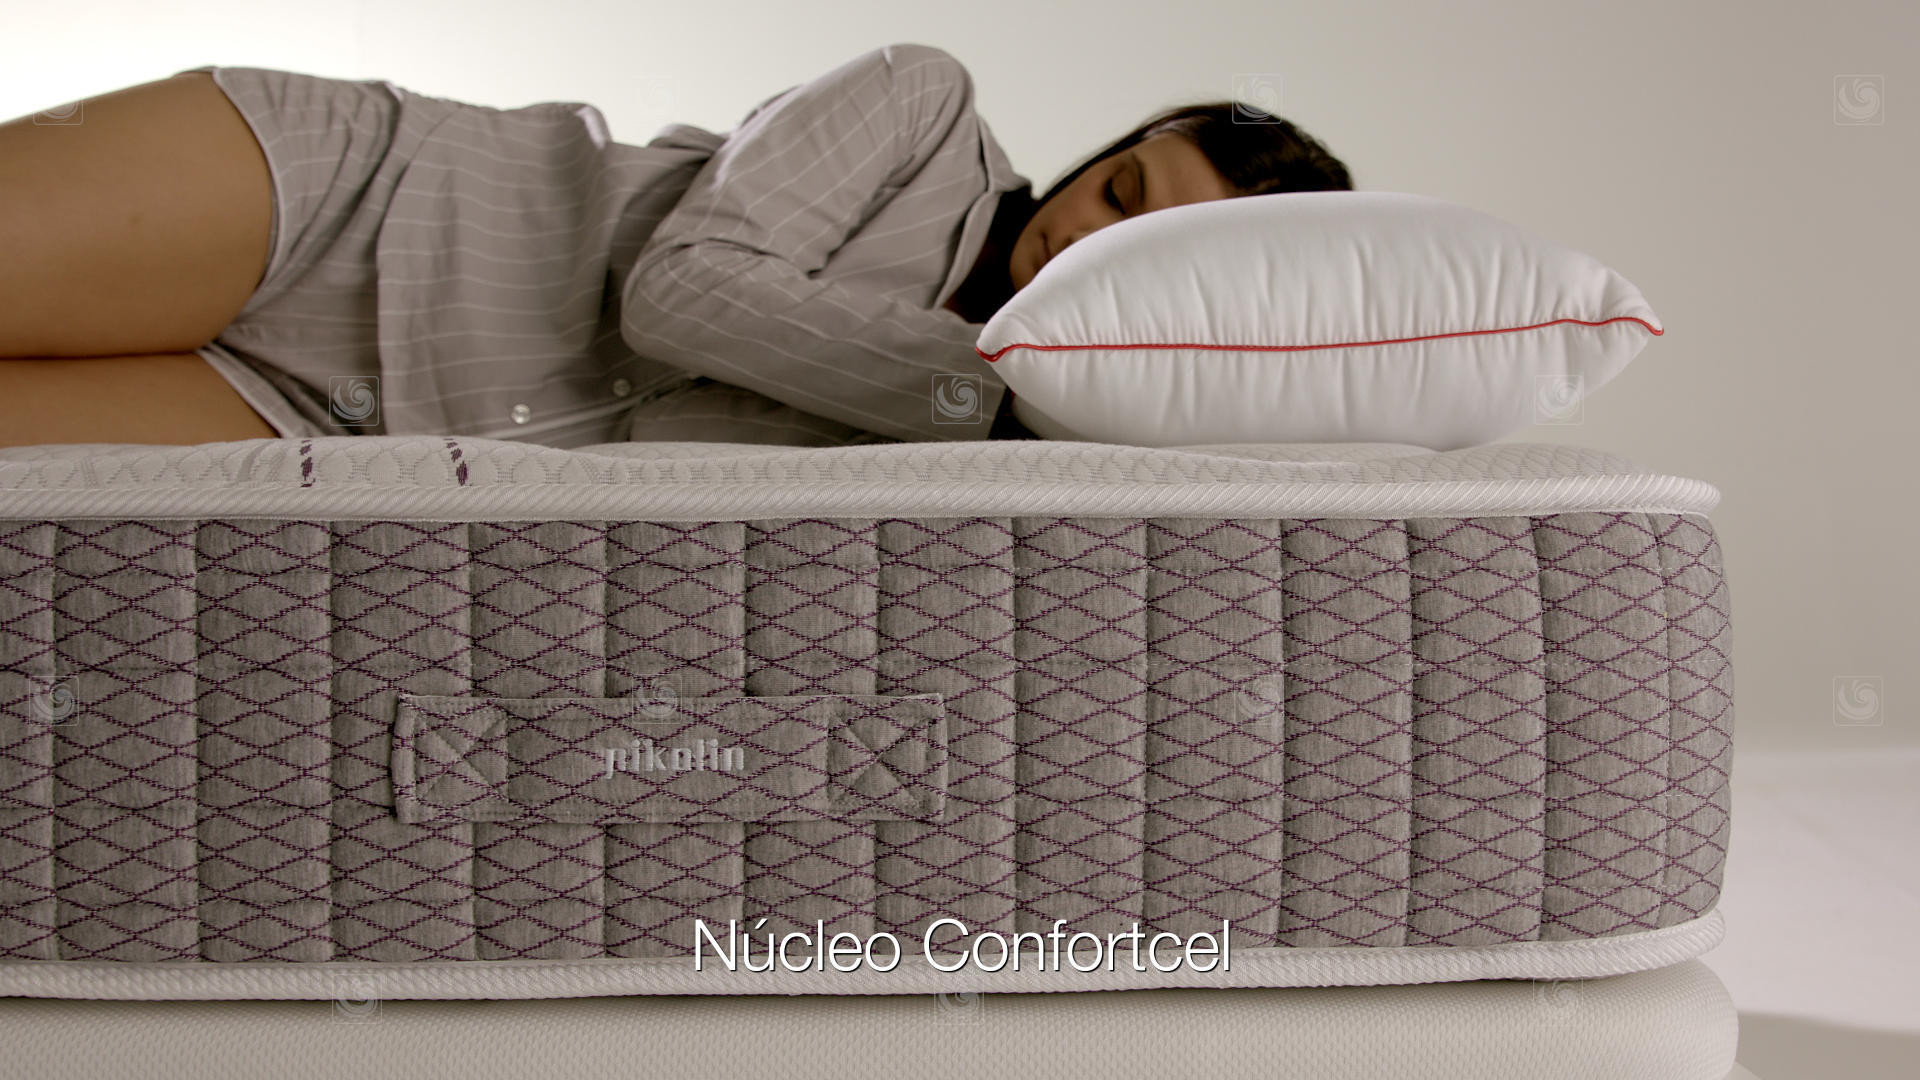 Videoframe from product video for Pikolin,showing the correct resting posture on a mattress